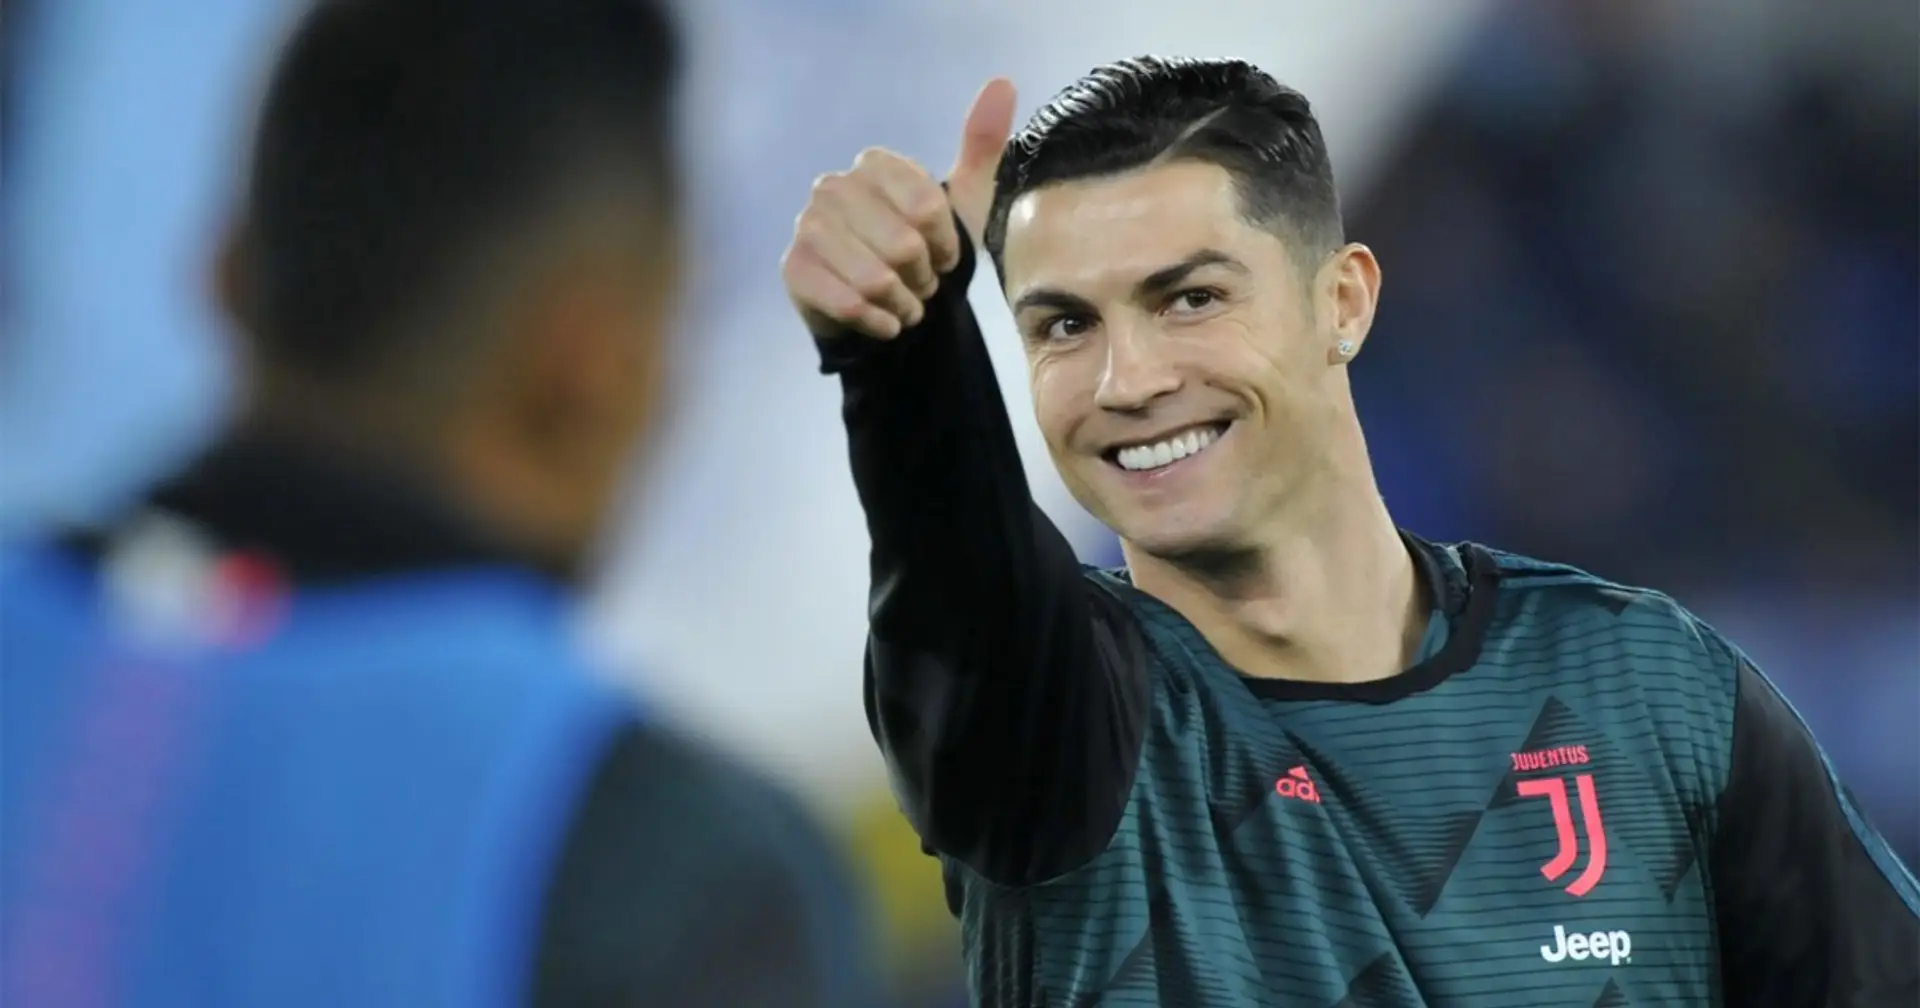 Man United one of three clubs 'contacted' by Ronaldo's camp to test transfer interest (reliability: 4 stars)